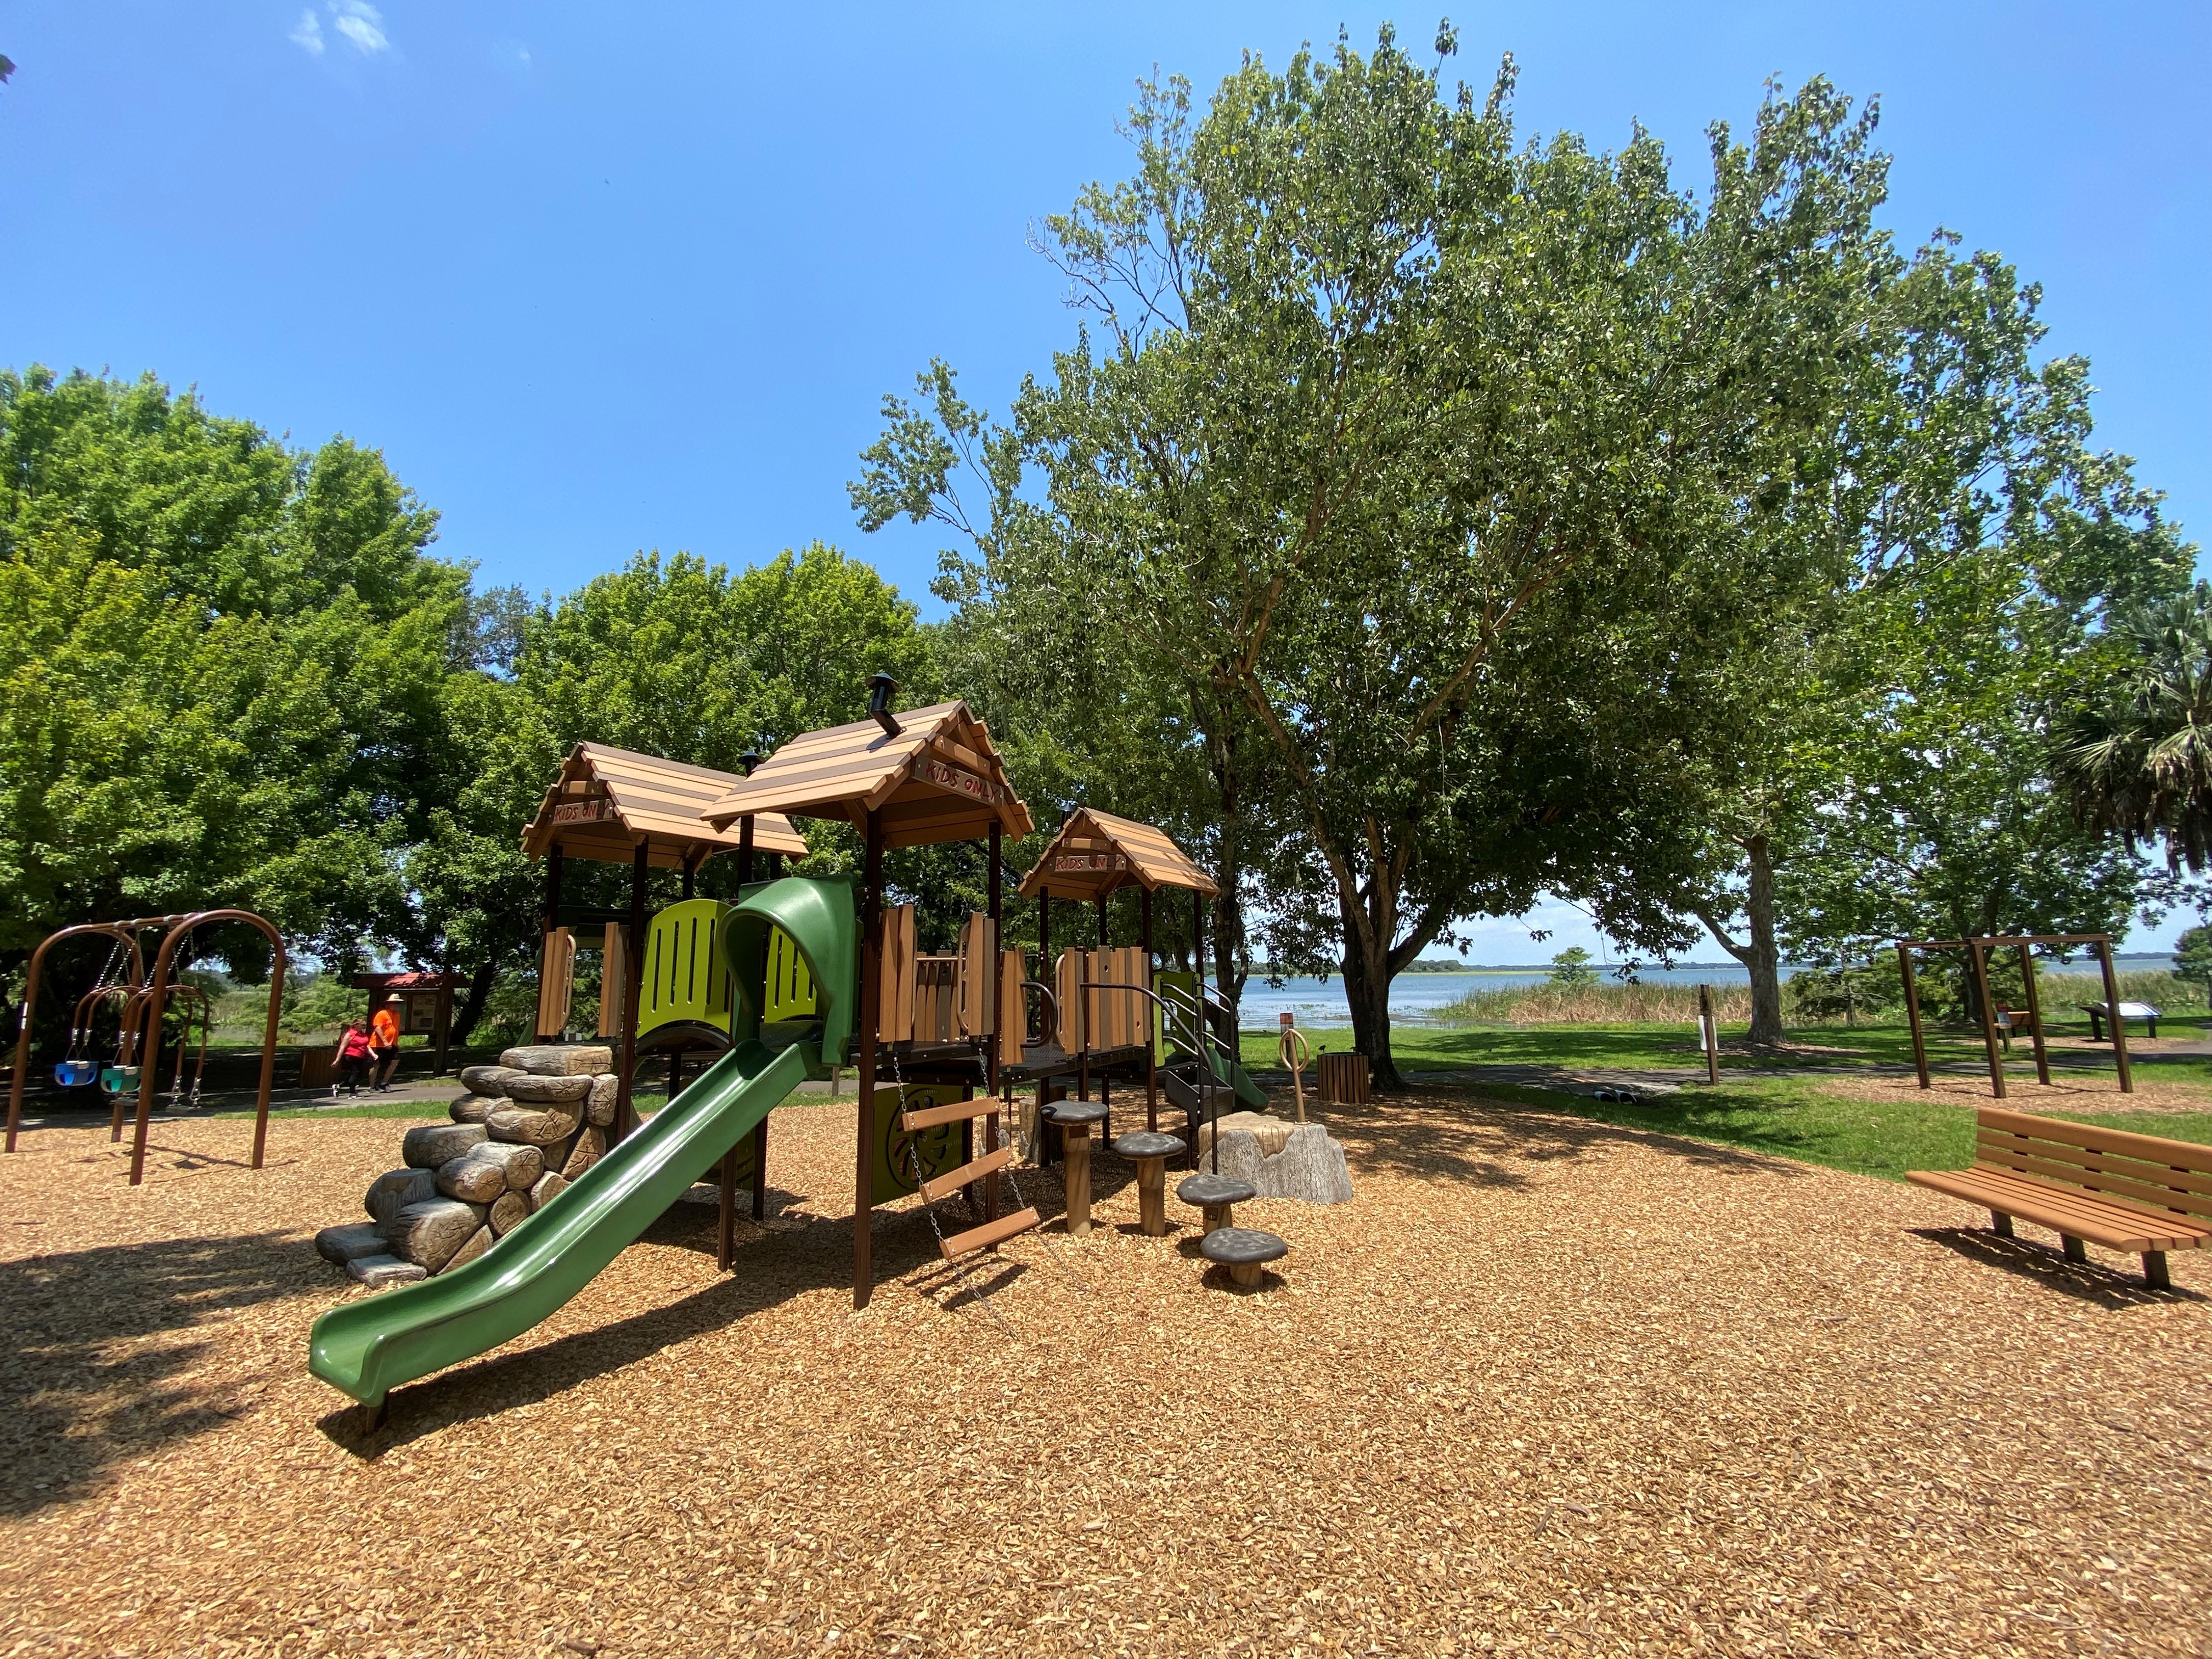 A small part of Lake Parker Park located in the Granada neighborhood.